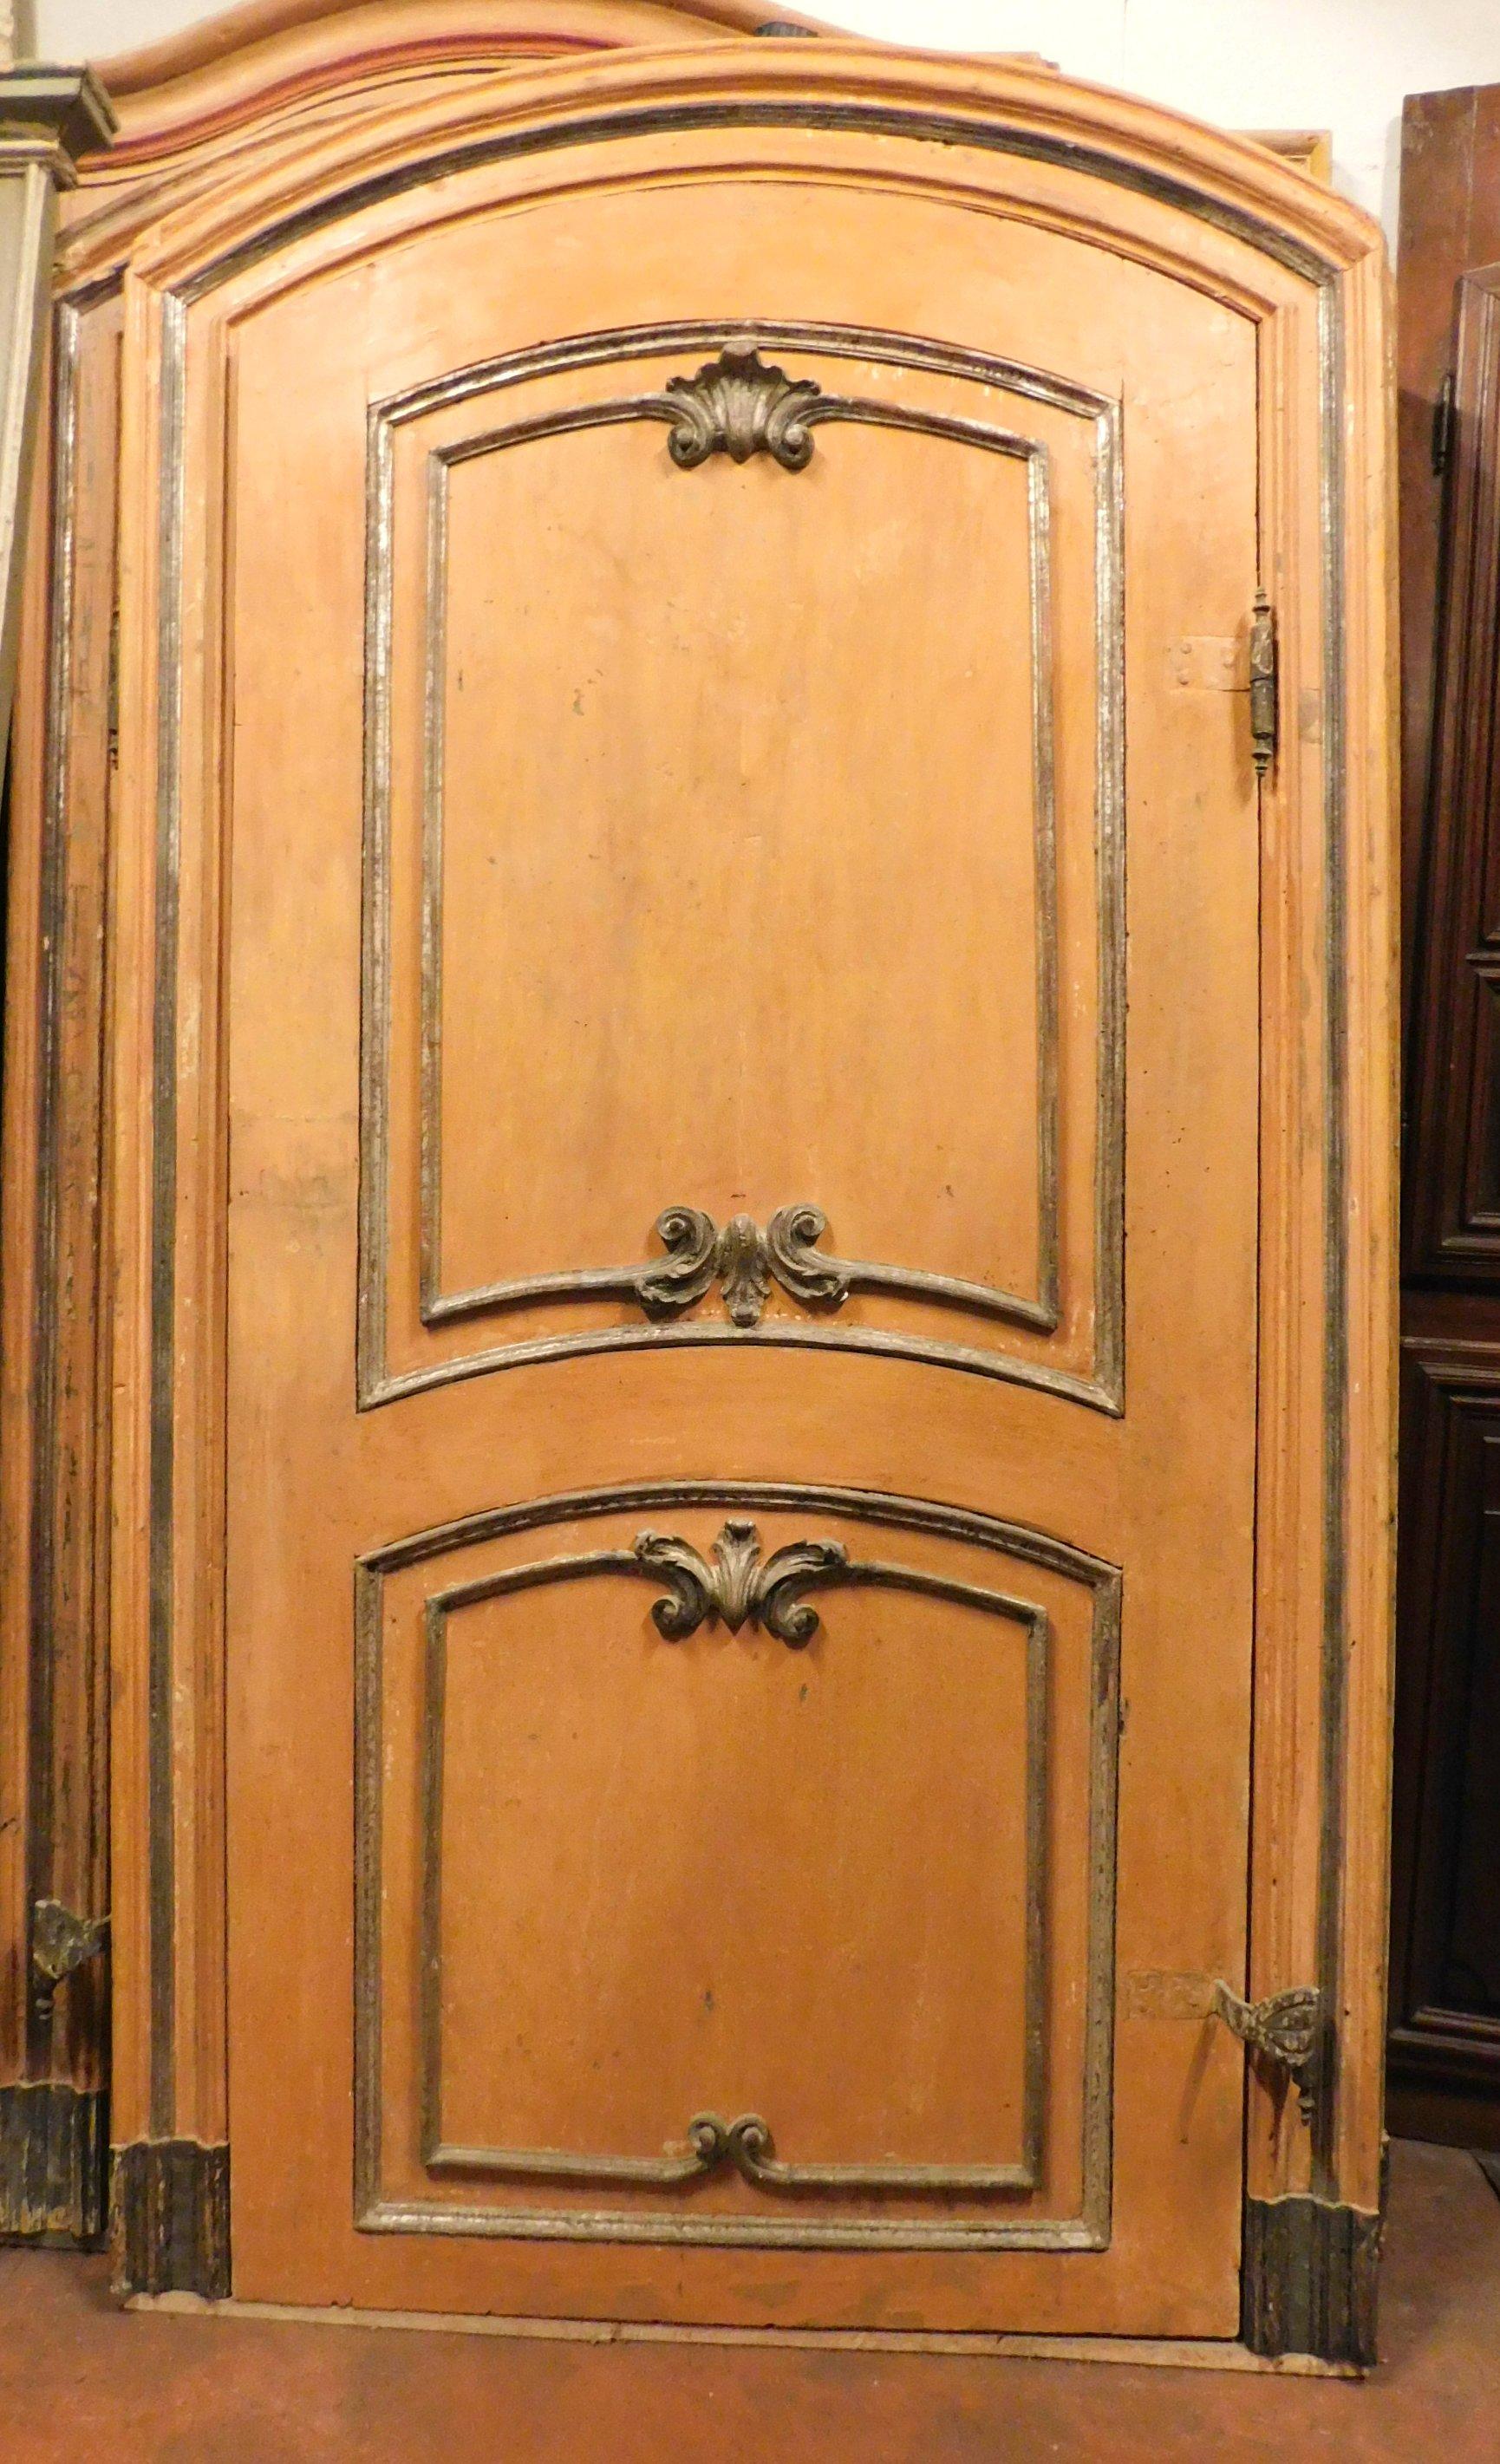 4 Ancient lacquered solid wood doors with orange background and silver moldings, produced in batch for an entire ancient residence of the late 1600s in Italy (Piedmont).
Of great value and scenic effect, difficult to find in this quantity and